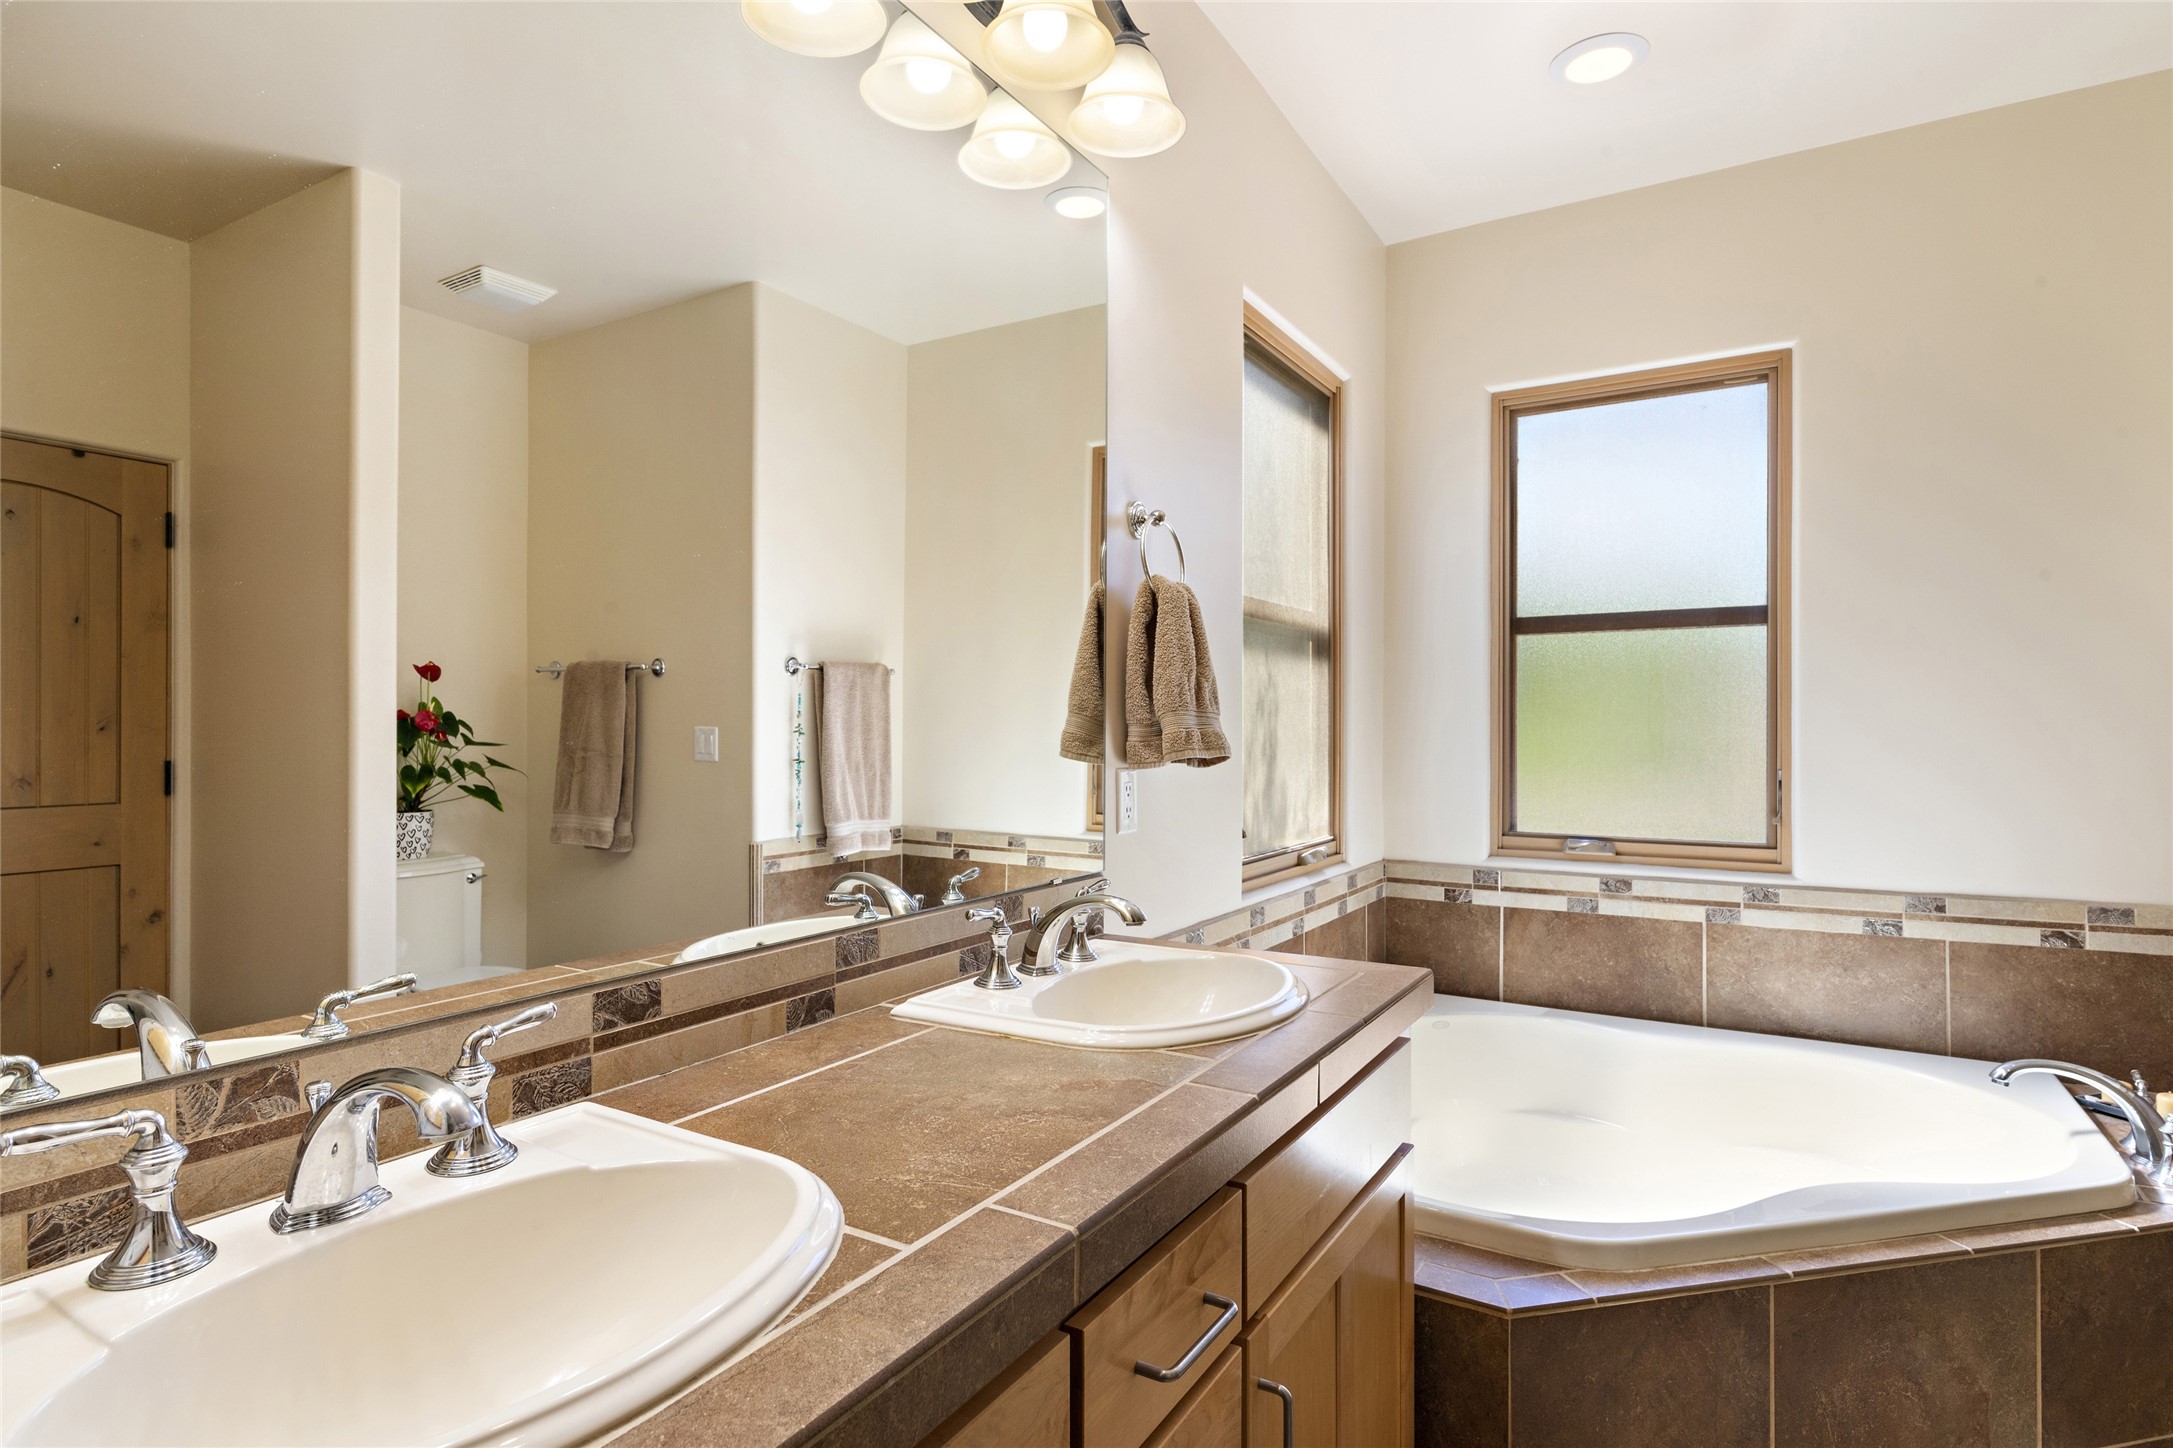 Primary bathroom with double sinks and large corner soaking tub